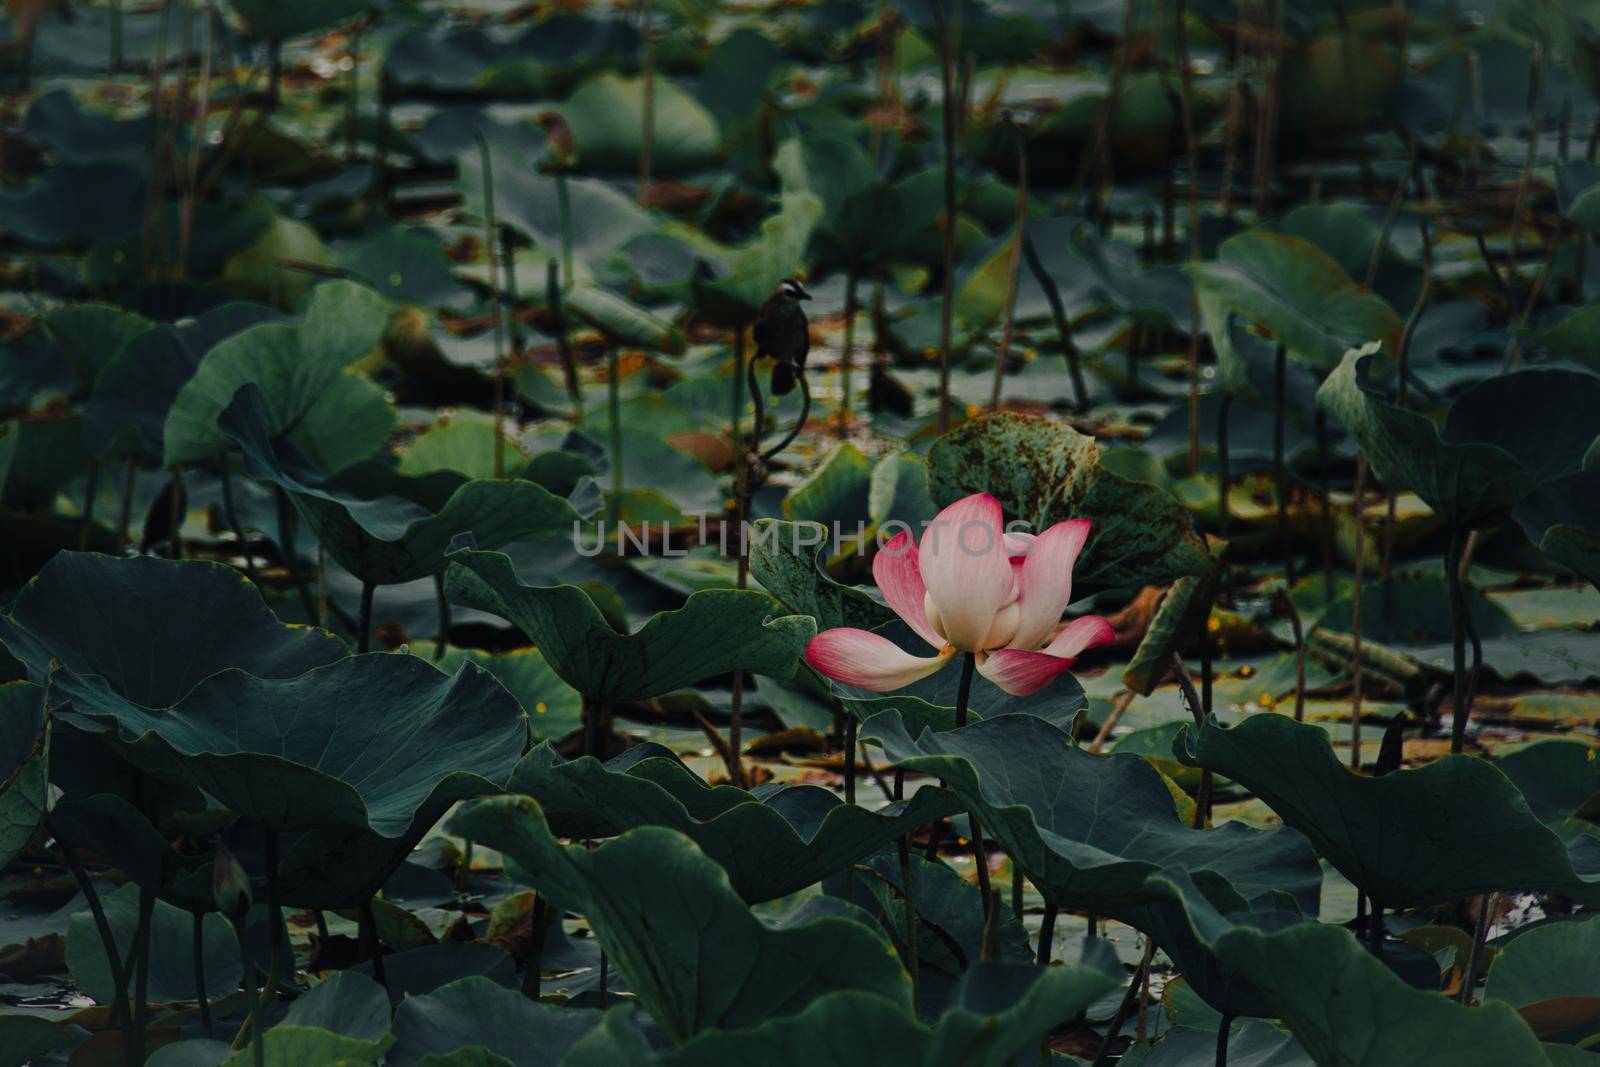 Lotus flower or Nelumbo nucifera in a pond of gently swaying leaves by Sonnet15